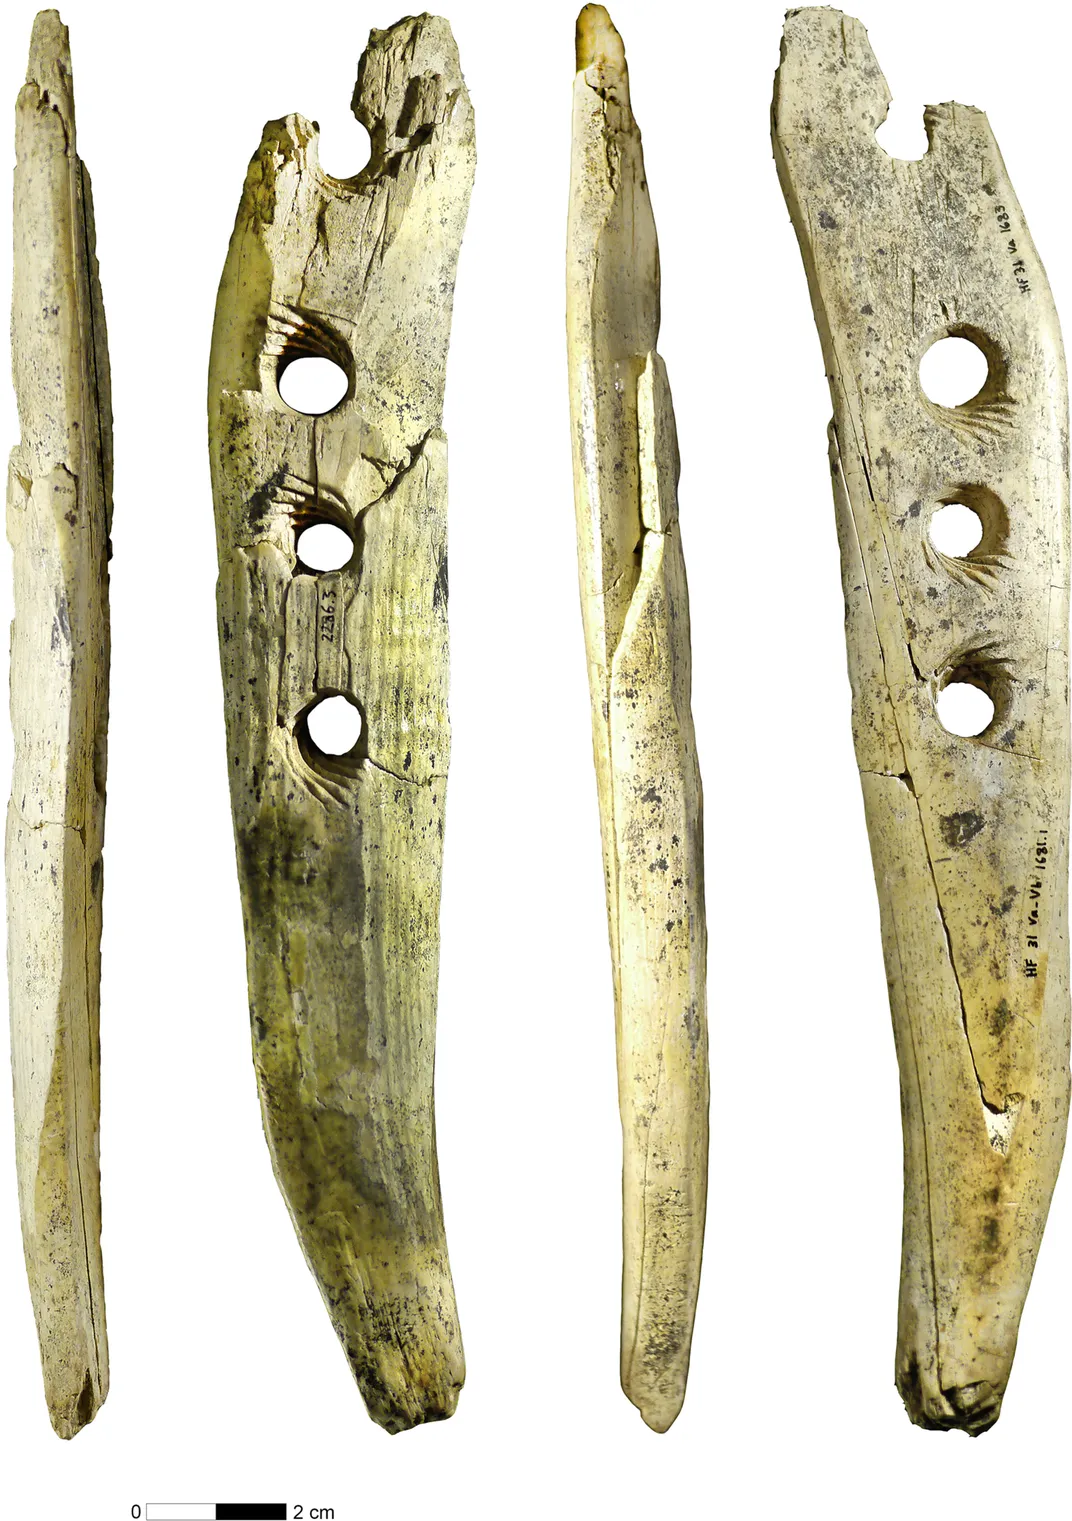 Four views of the ivory tusk found in the Hohle Fels Cave, shown in parallel.